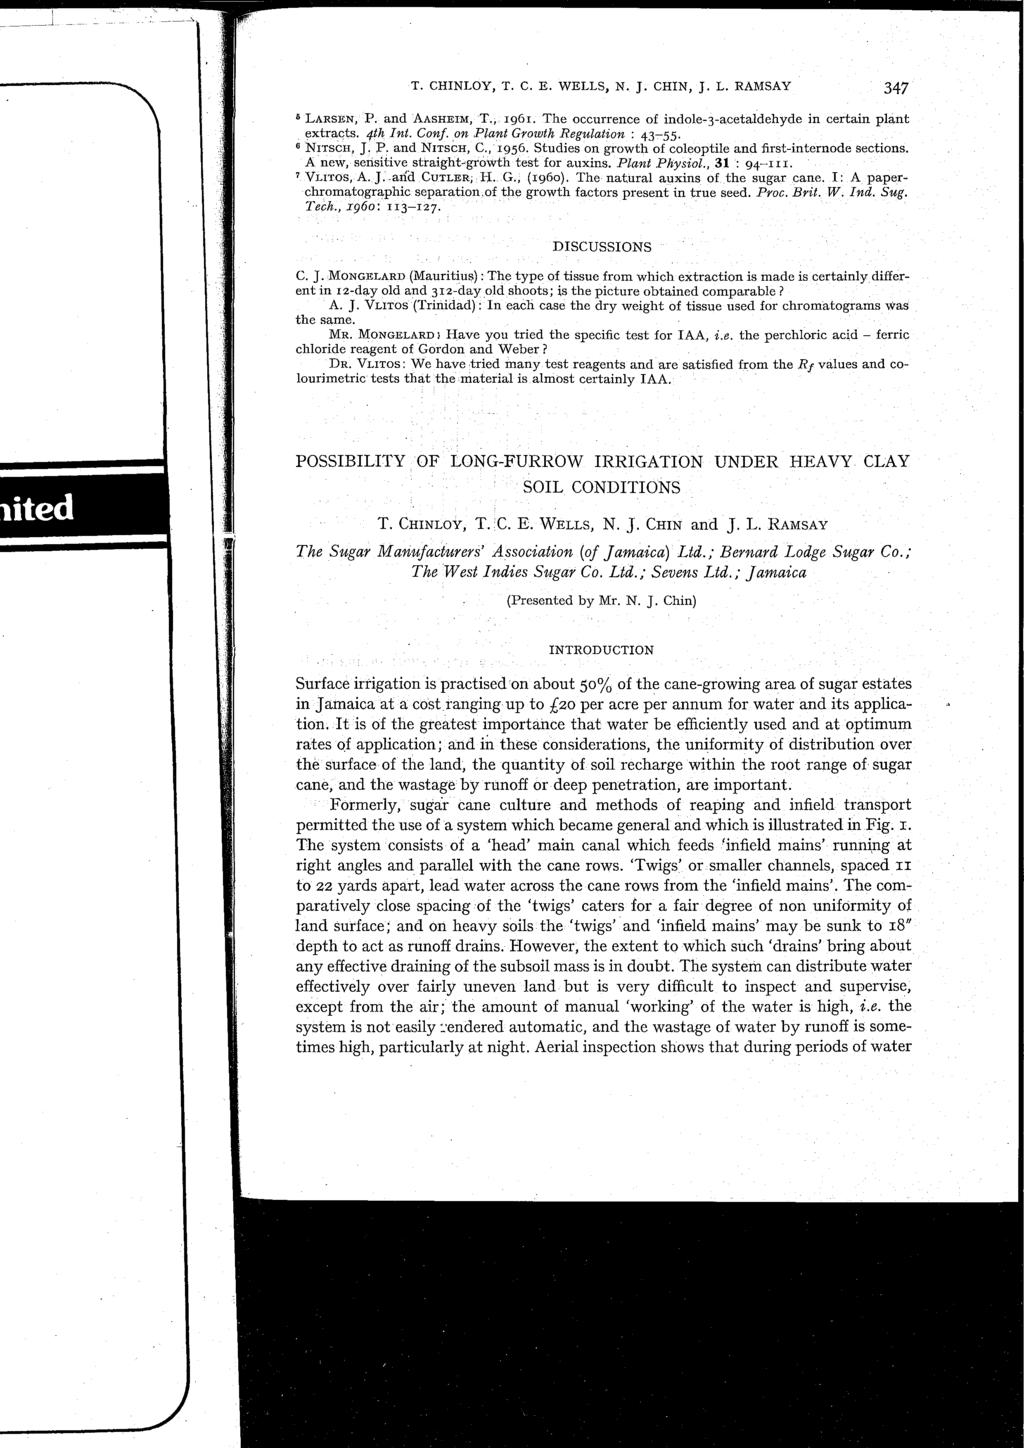 F T. CHINLOY, T. C. E. WELLS, N. J. CHIN, J. L. RAMSAY 6 LARSEN, P. and AASHEIM, T., 1961. The occurrence of indole-3-acetaldehyde in certain plant extracts. 4th Int. Conf.